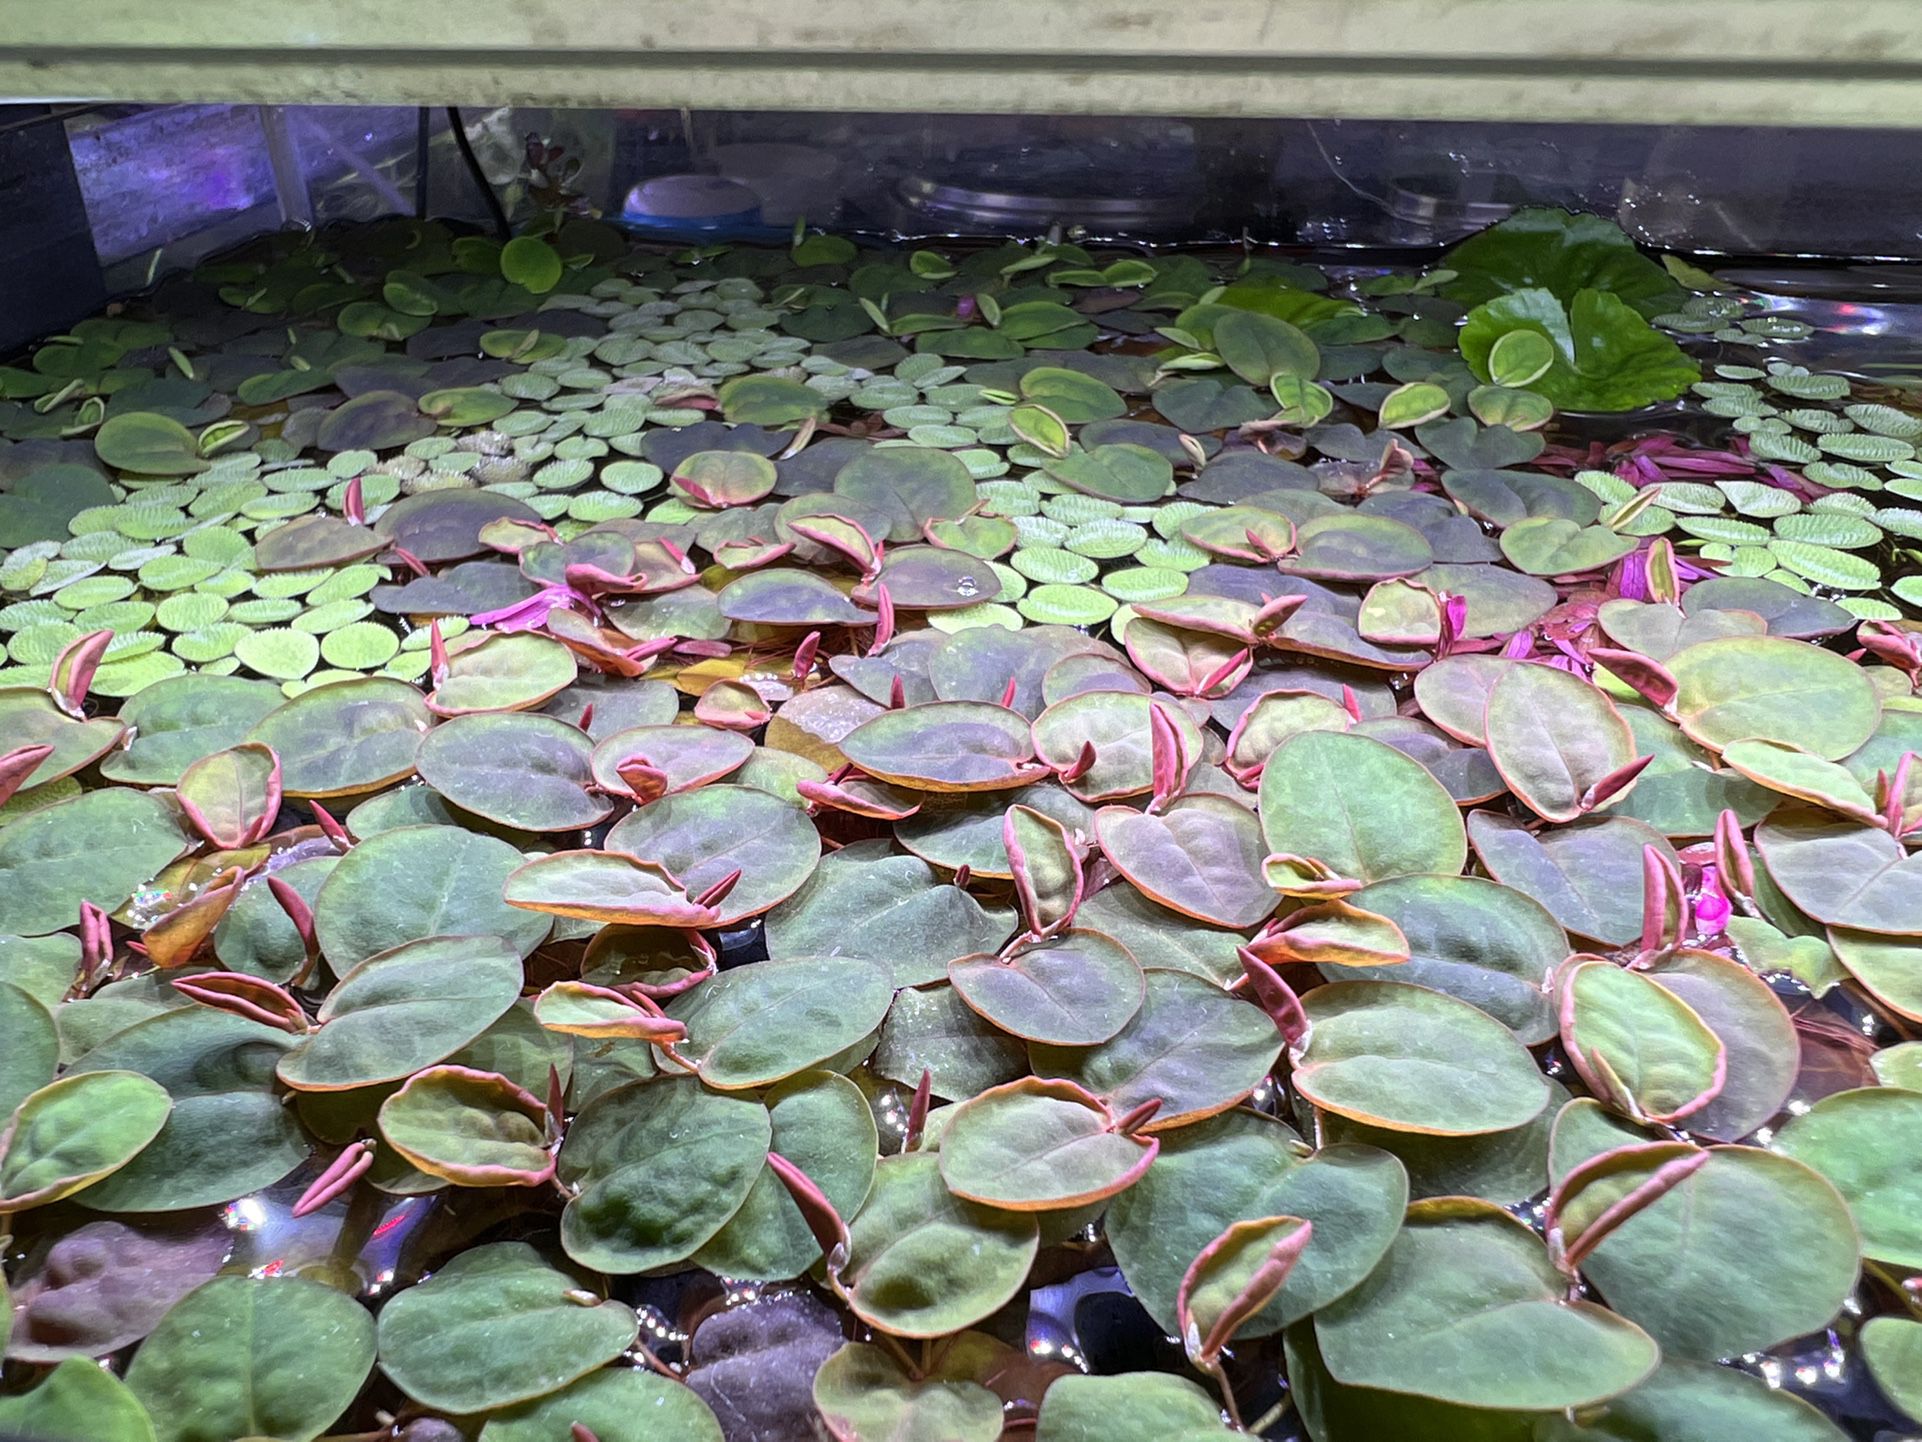 Red Root Floaters 